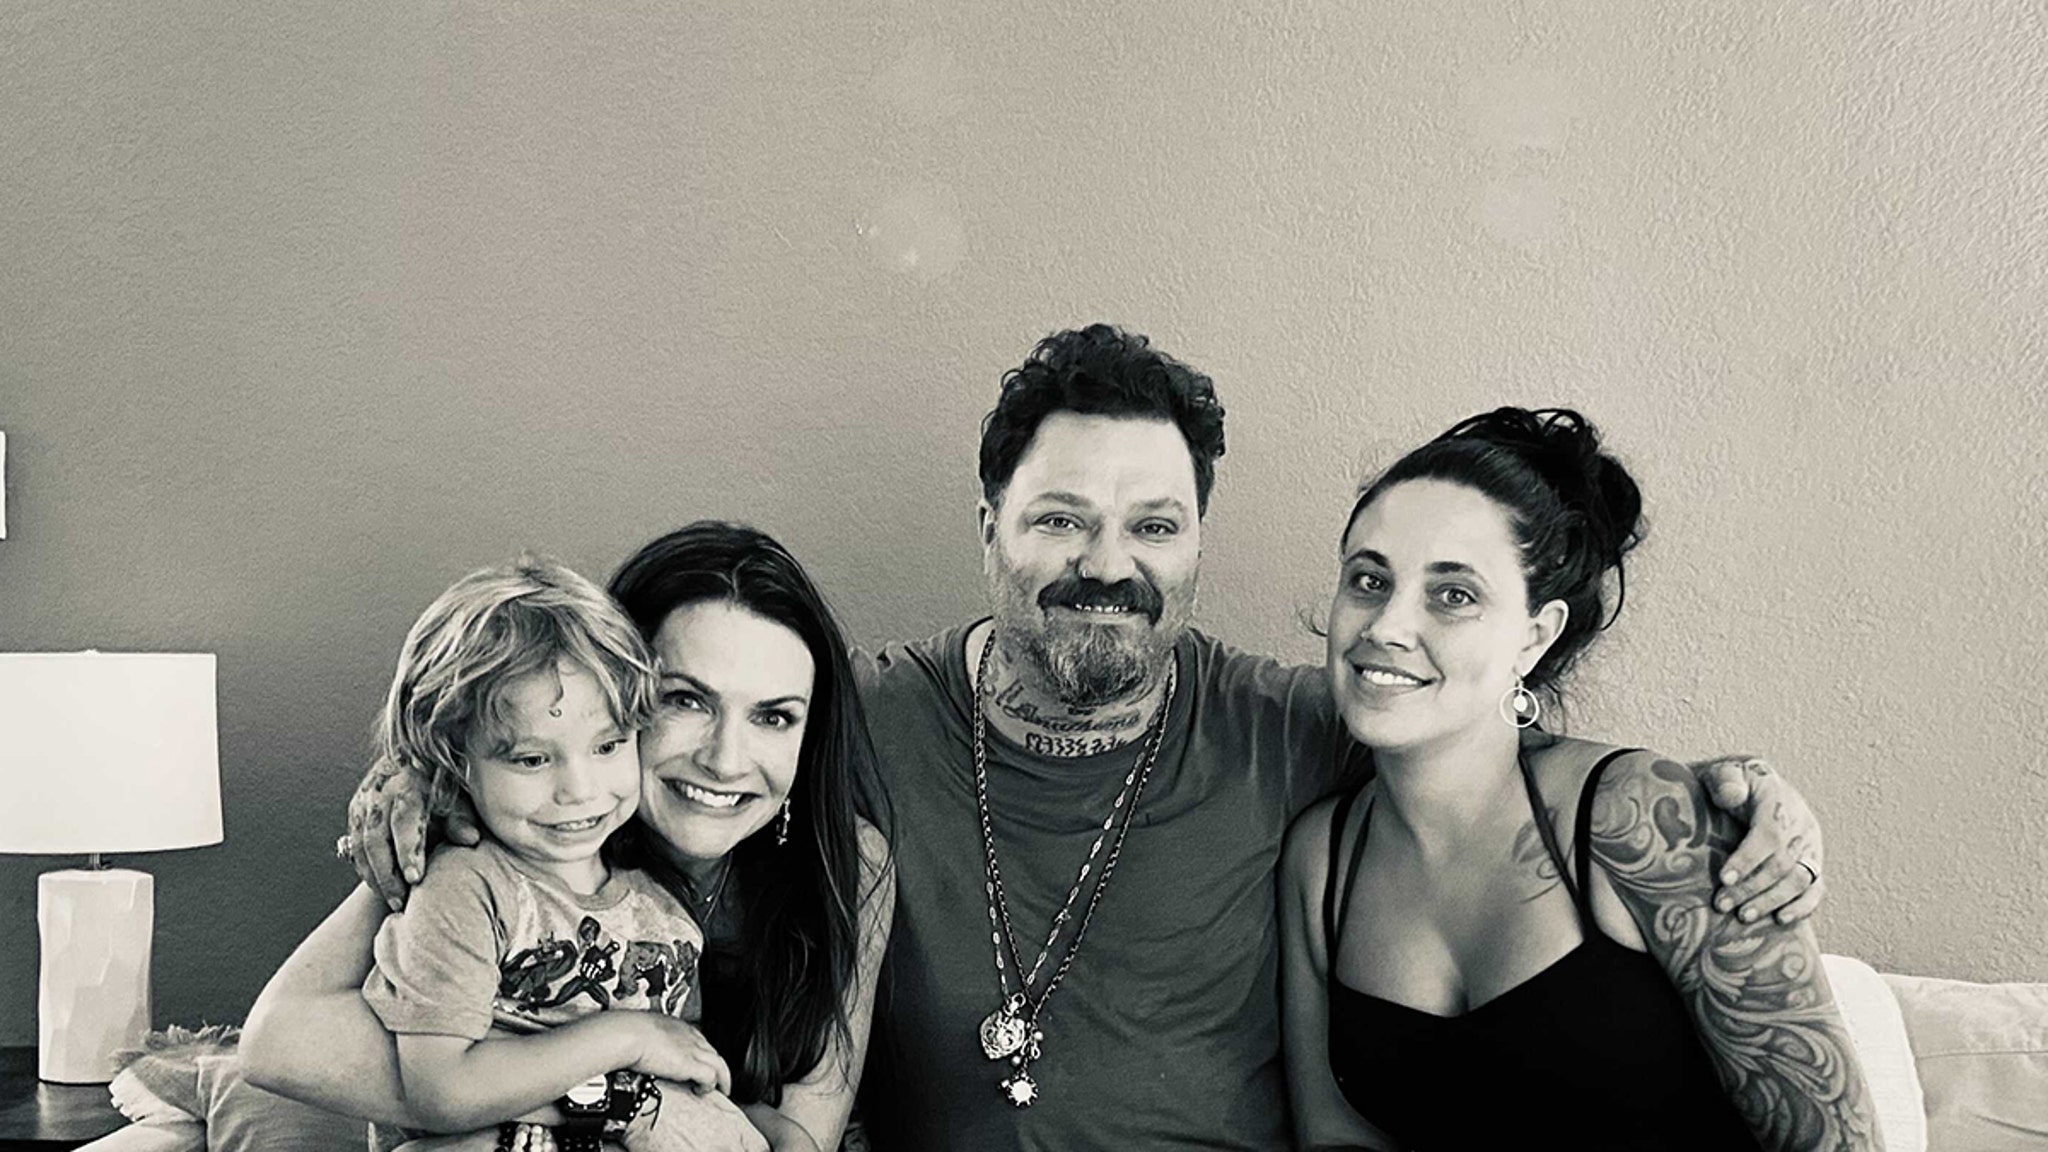 Bam Margera Completes One Year Drug and Alcohol Treatment Program - TMZ : Bam Margera says he completed a year-long treatment program for drug and alcohol abuse.  | Tranquility 國際社群